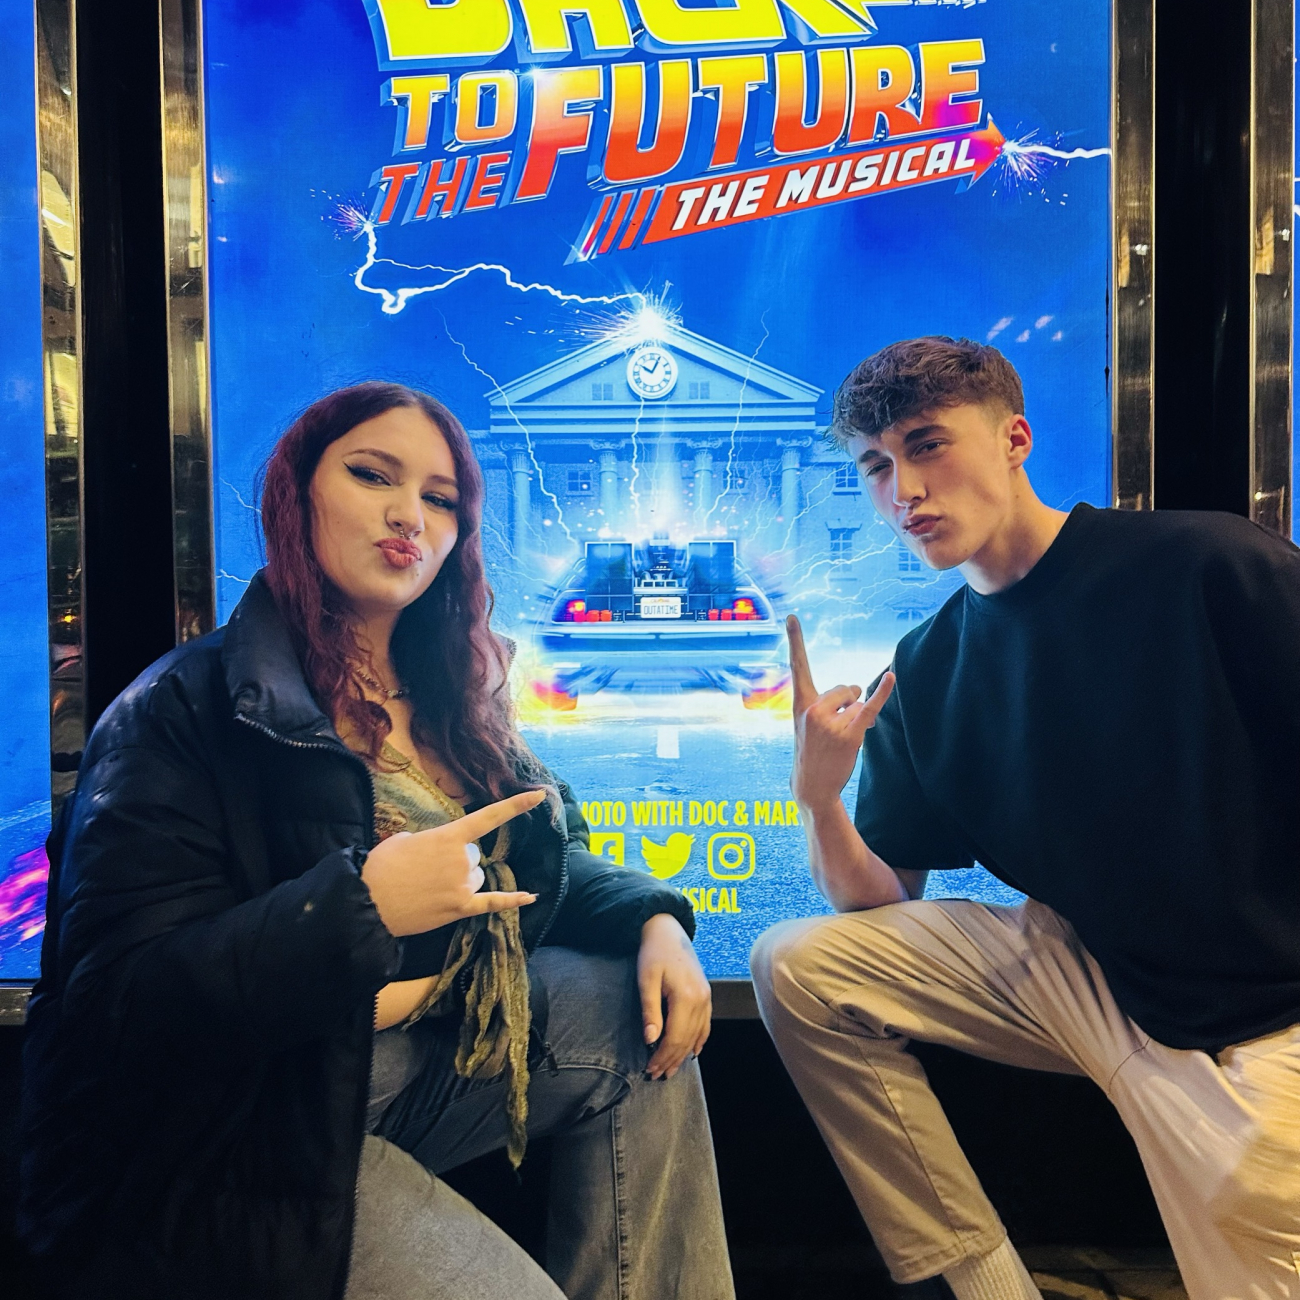 a female and male student posing in front of the back to the future musical poster in London